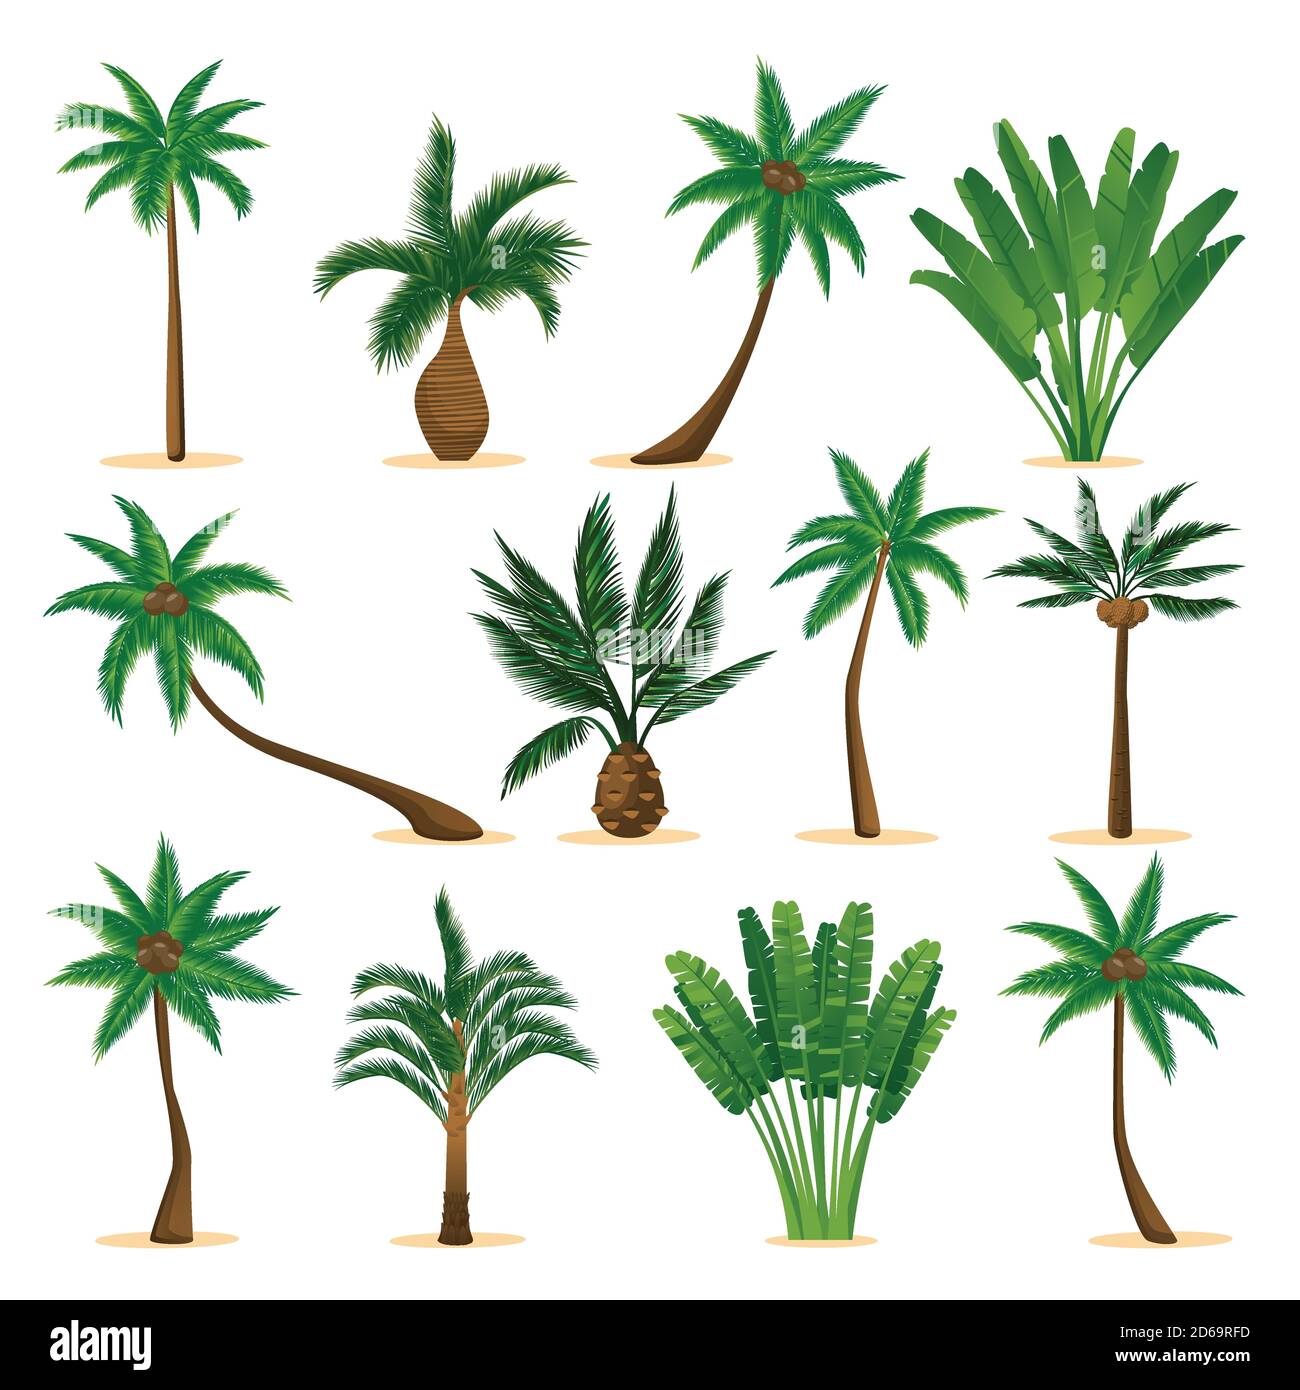 Tropical coconut palm trees set, isolated on white background. Vector flat cartoon illustration. Jungle plants and summer floral design elements. Stock Vector